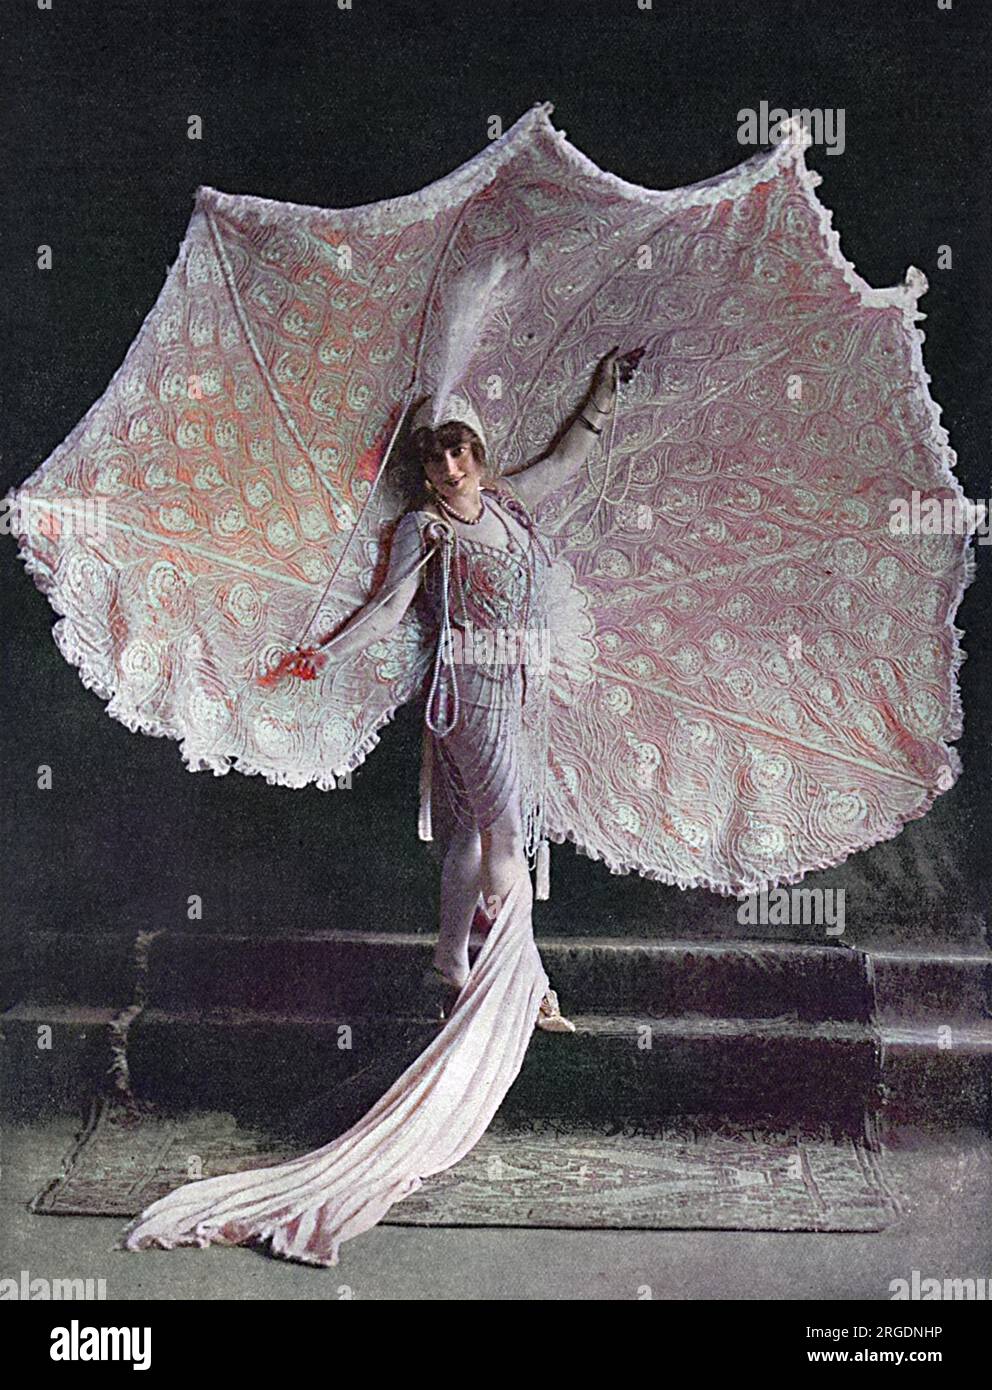 Miss Anna Held, appearing in 'Follow Me' at the Casino in New York, displaying her spectacular peacock gown with the 'tail spread'. Stock Photo